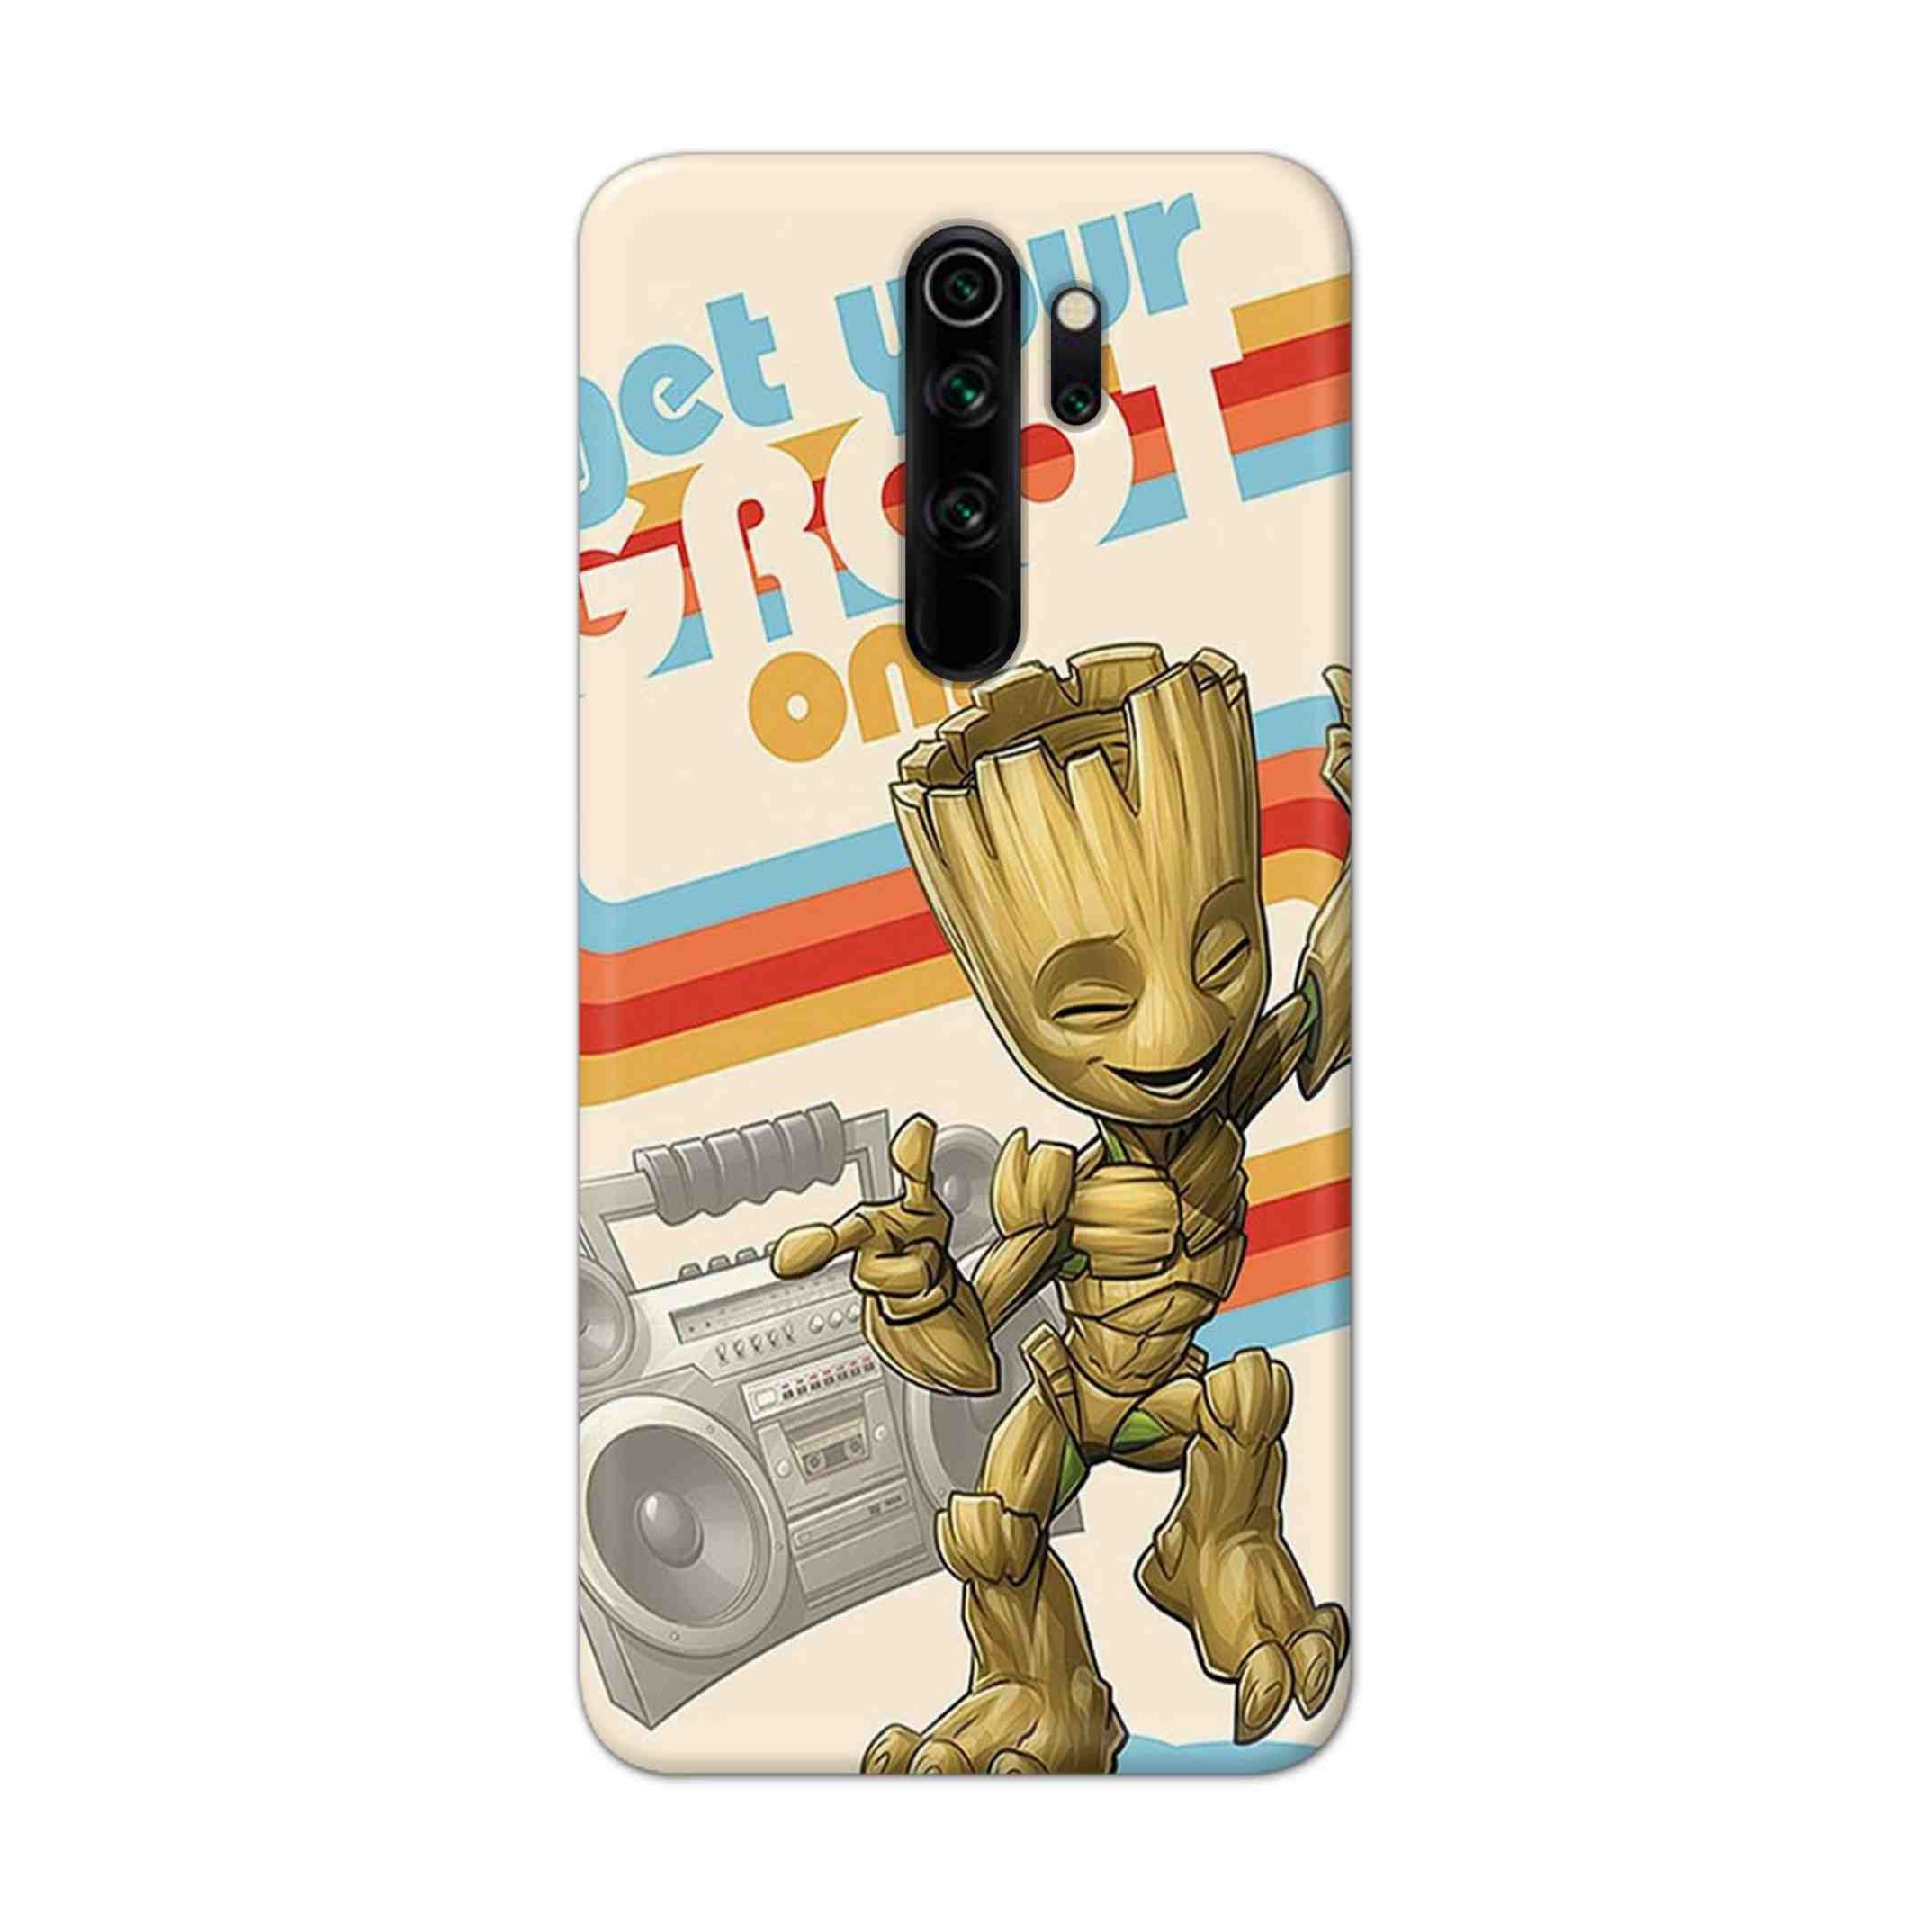 Buy Groot Hard Back Mobile Phone Case Cover For Xiaomi Redmi Note 8 Pro Online